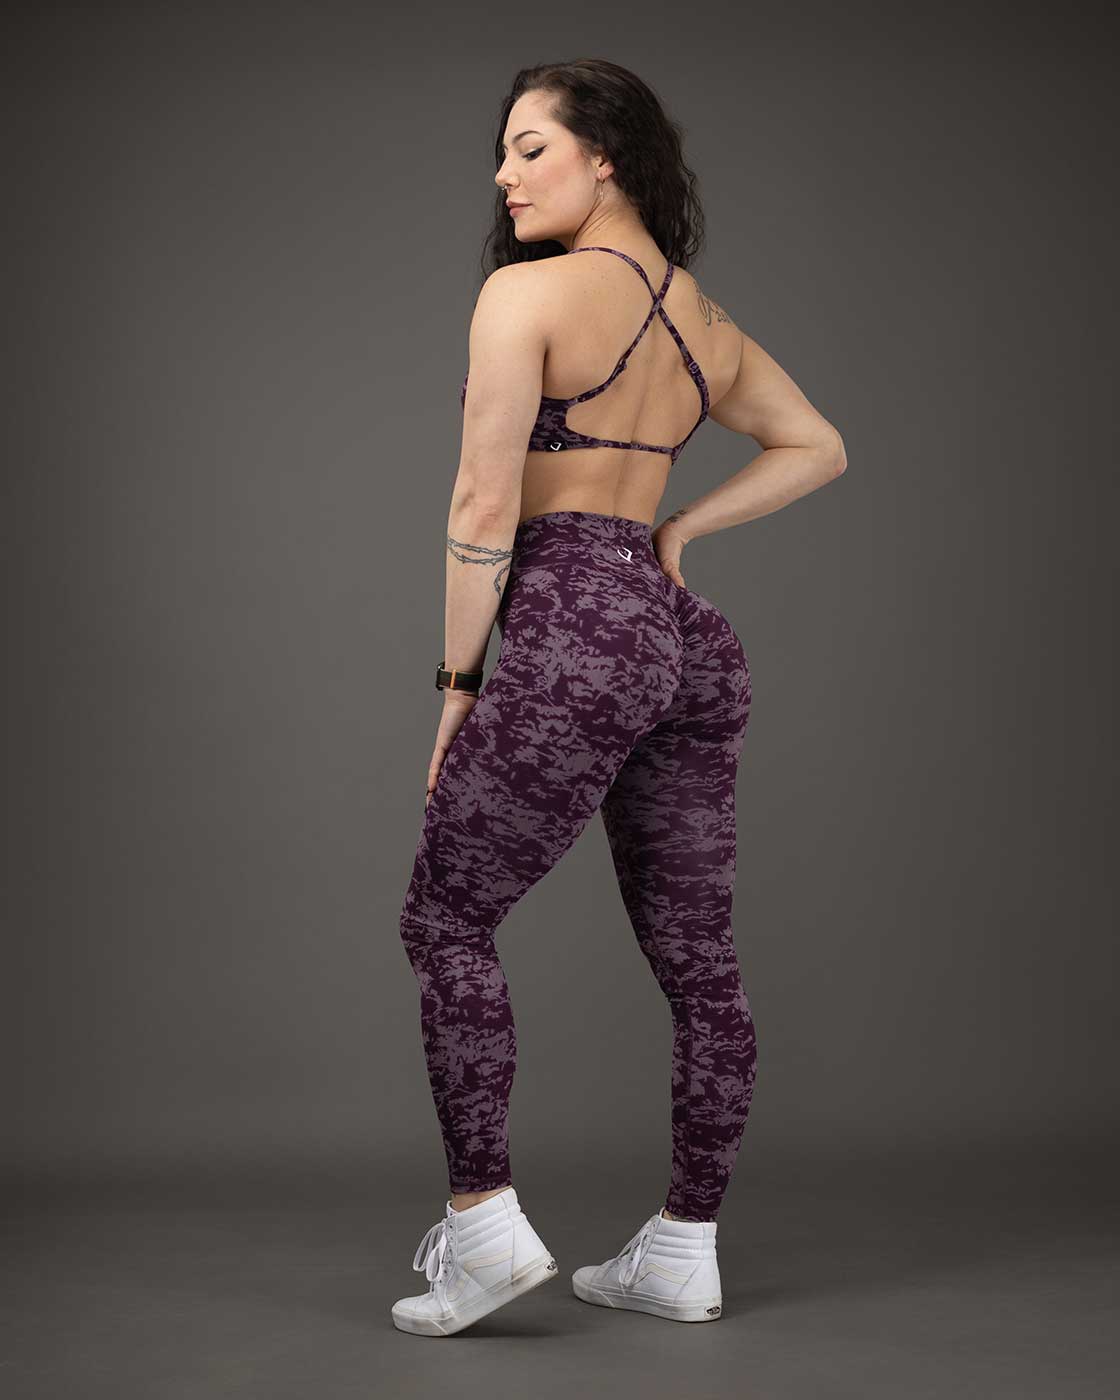 Solid Color Leopard Workout Leggings Camo Sports Gym Tights for